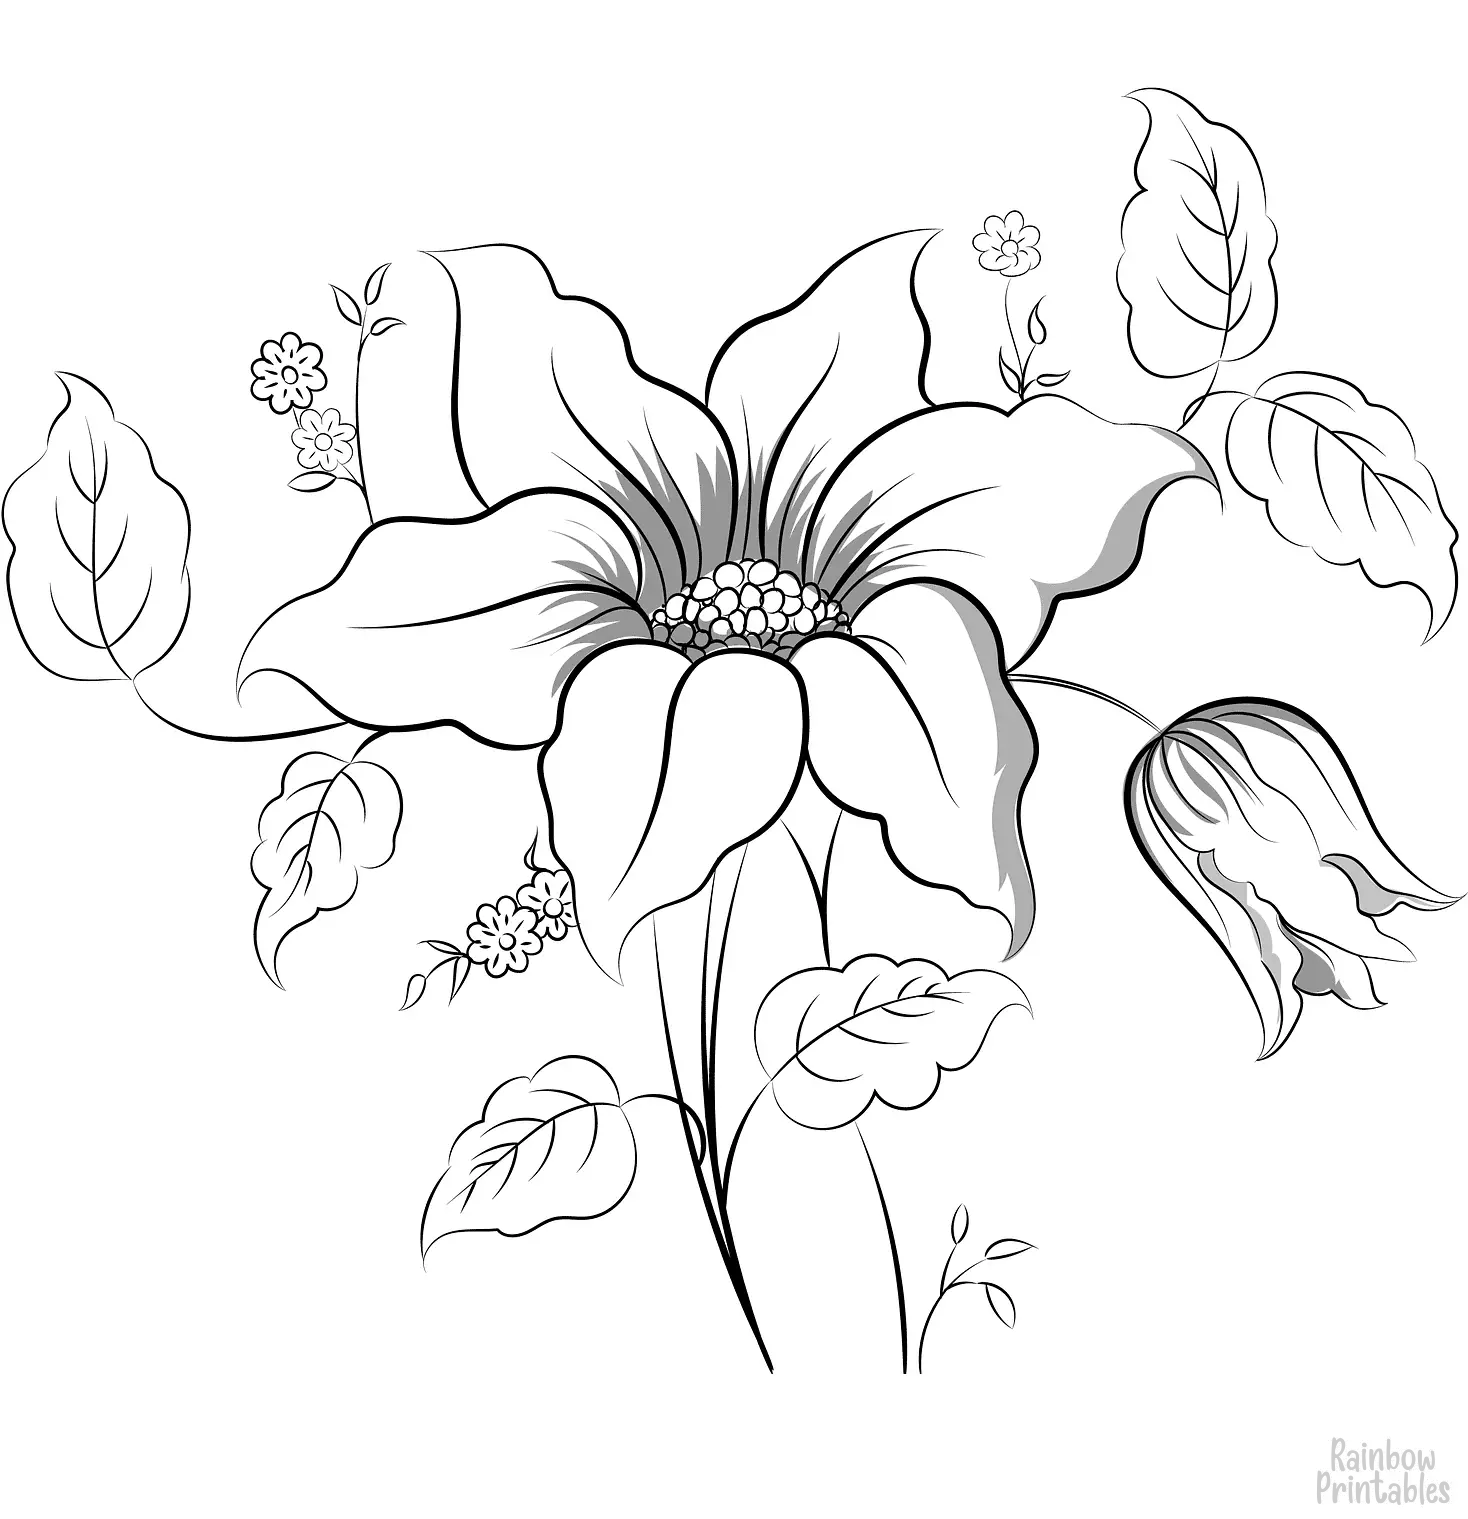 SIMPLE-EASY-line-drawings-FLOWER-coloring-page-for-kids Outline